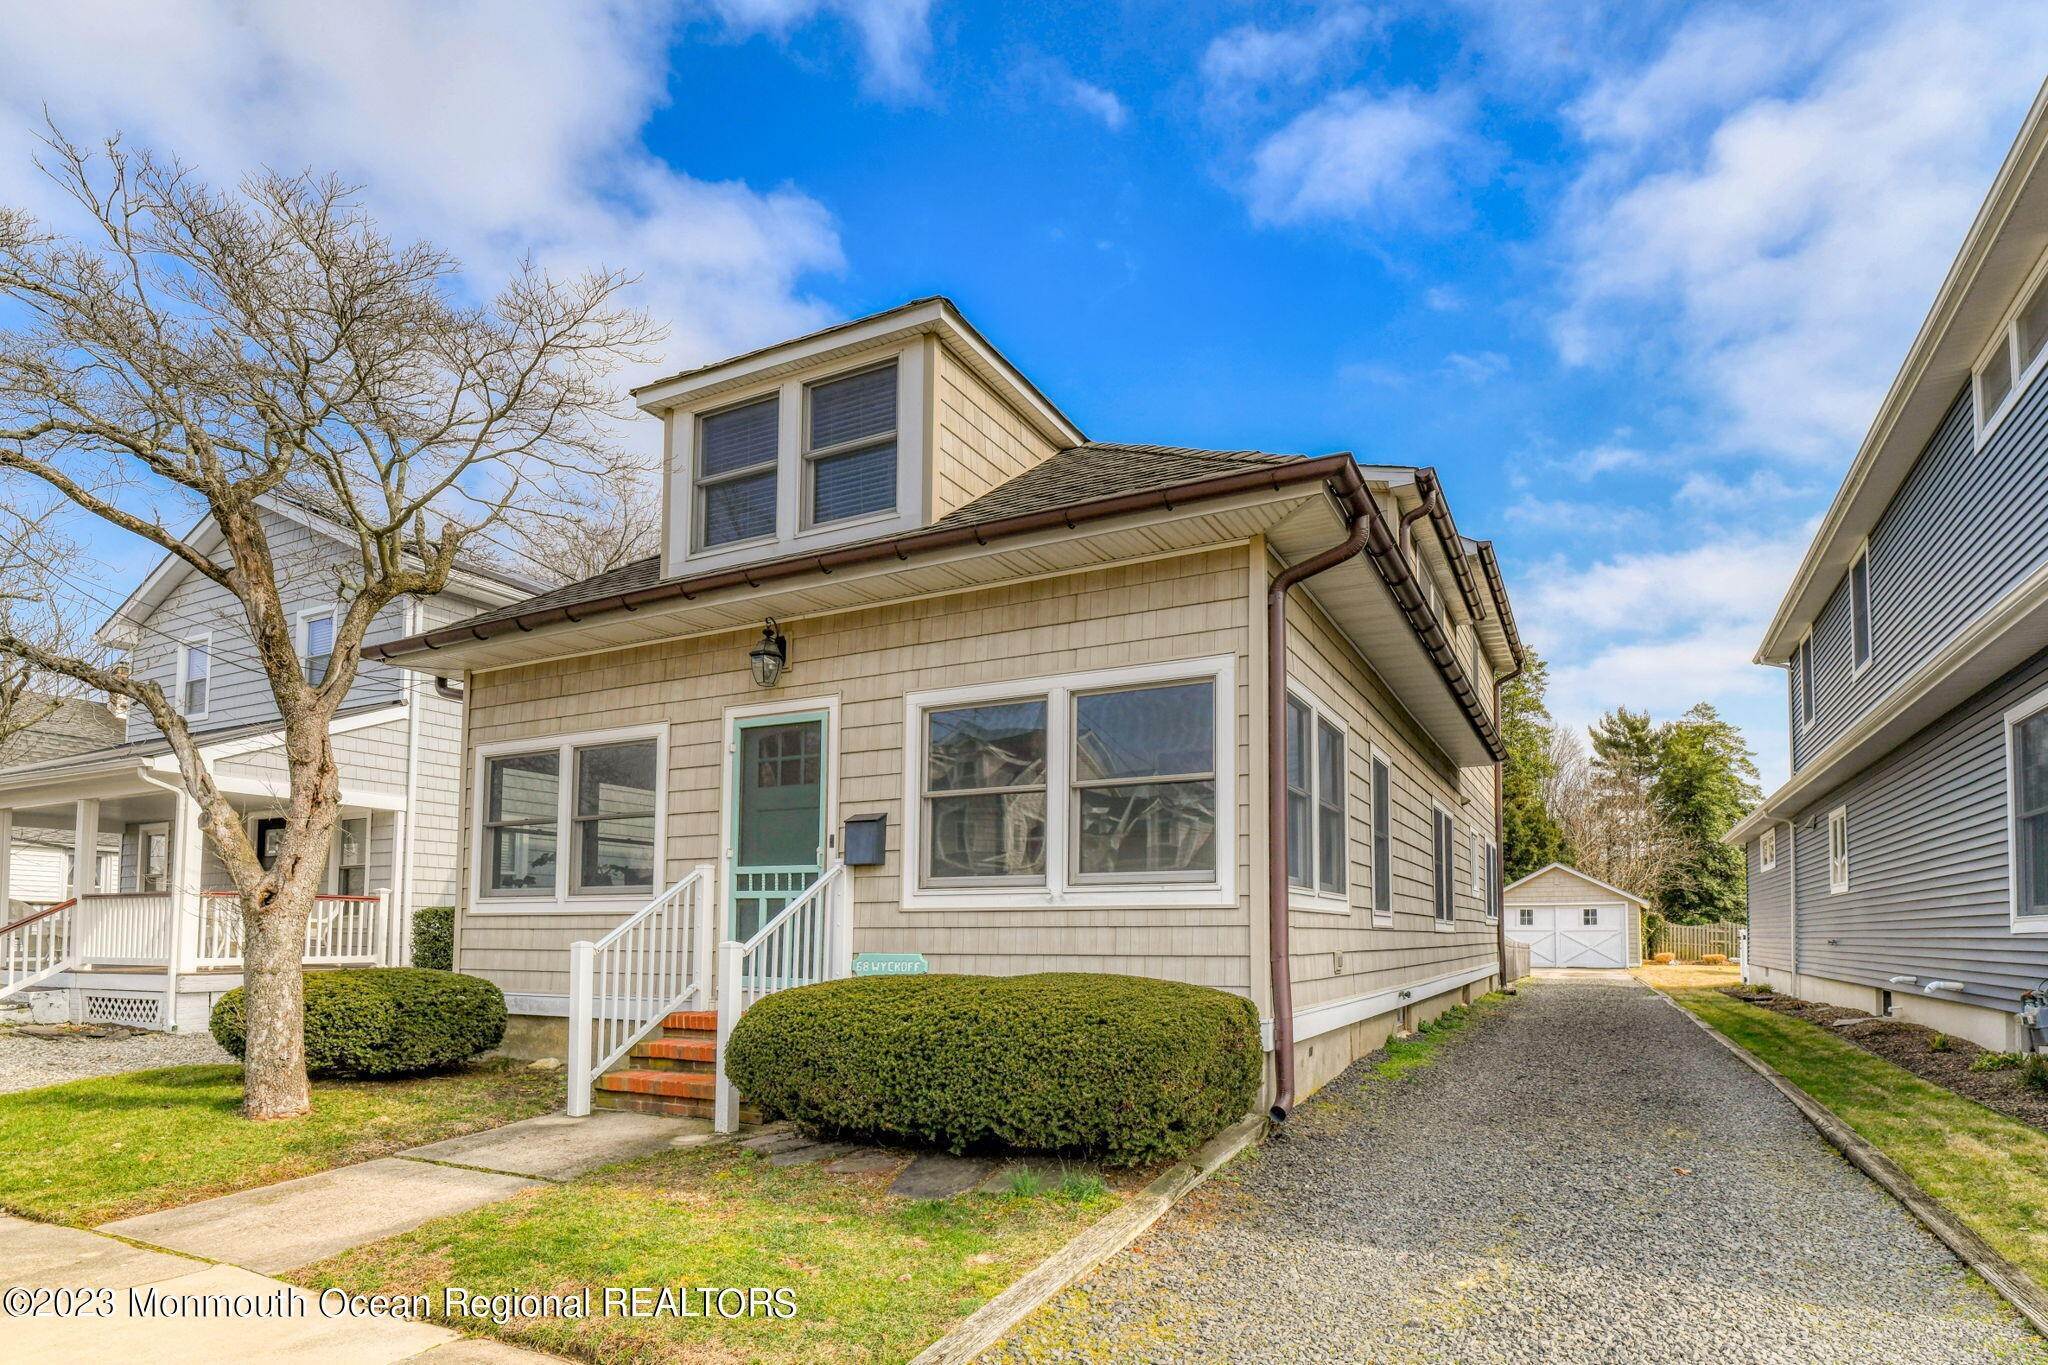 Property for Sale at 68 Wyckoff Avenue Manasquan, New Jersey 08736 United States